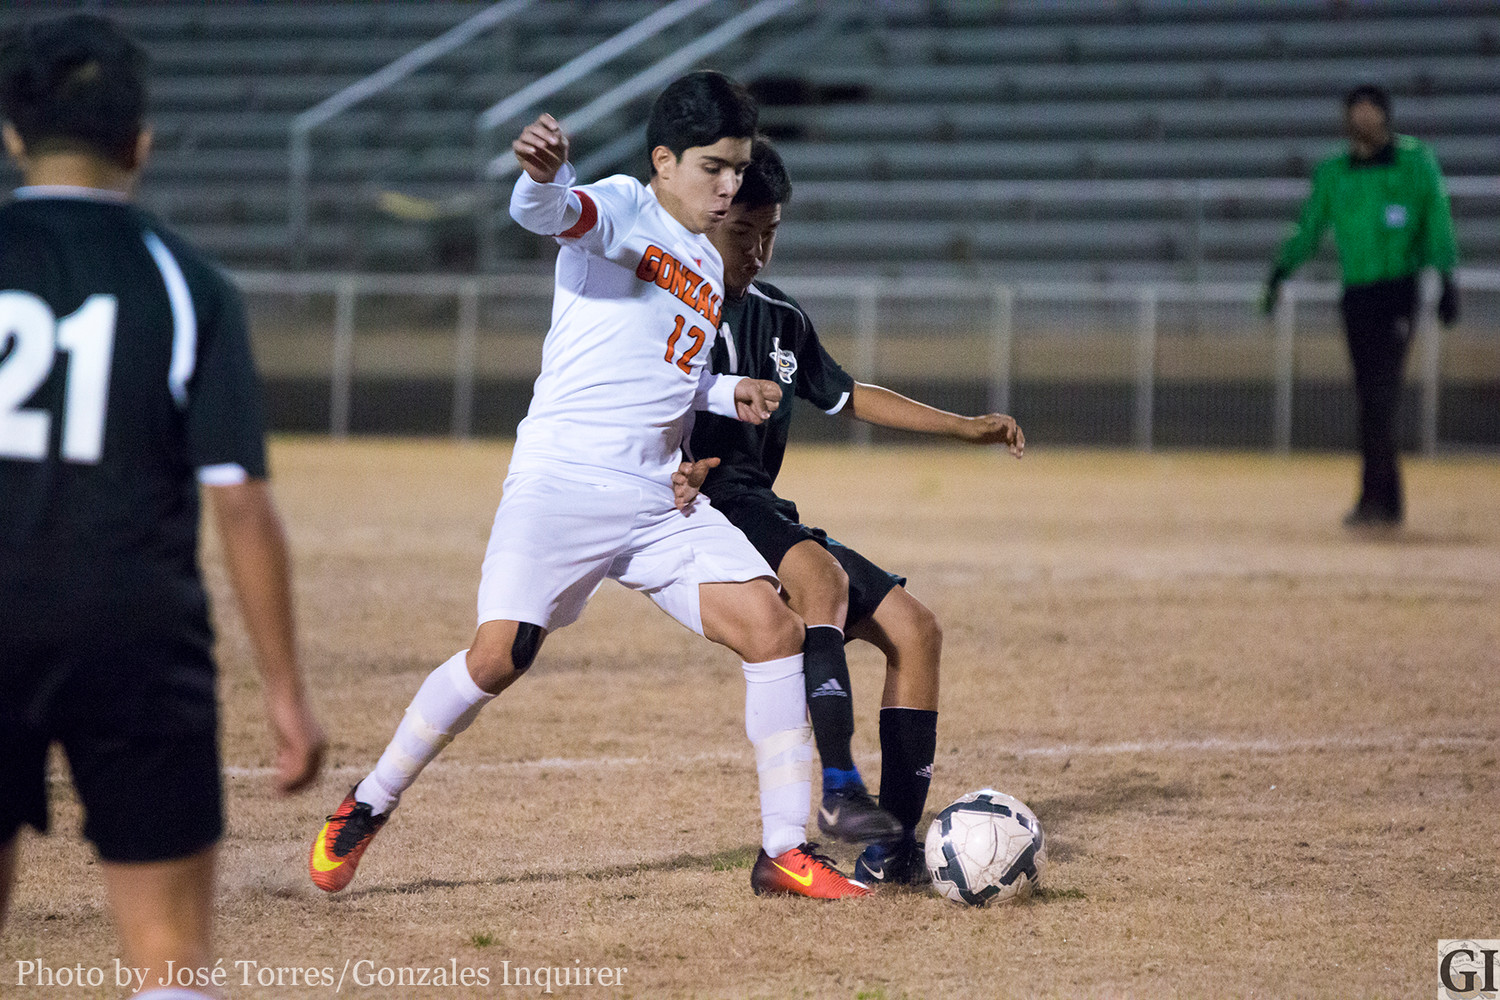 Suriel Rangel (12) fights for possession in Gonzales’ 2-1 win over Sealy in a non-district game on Monday. Rangel scored both goals in the victory.